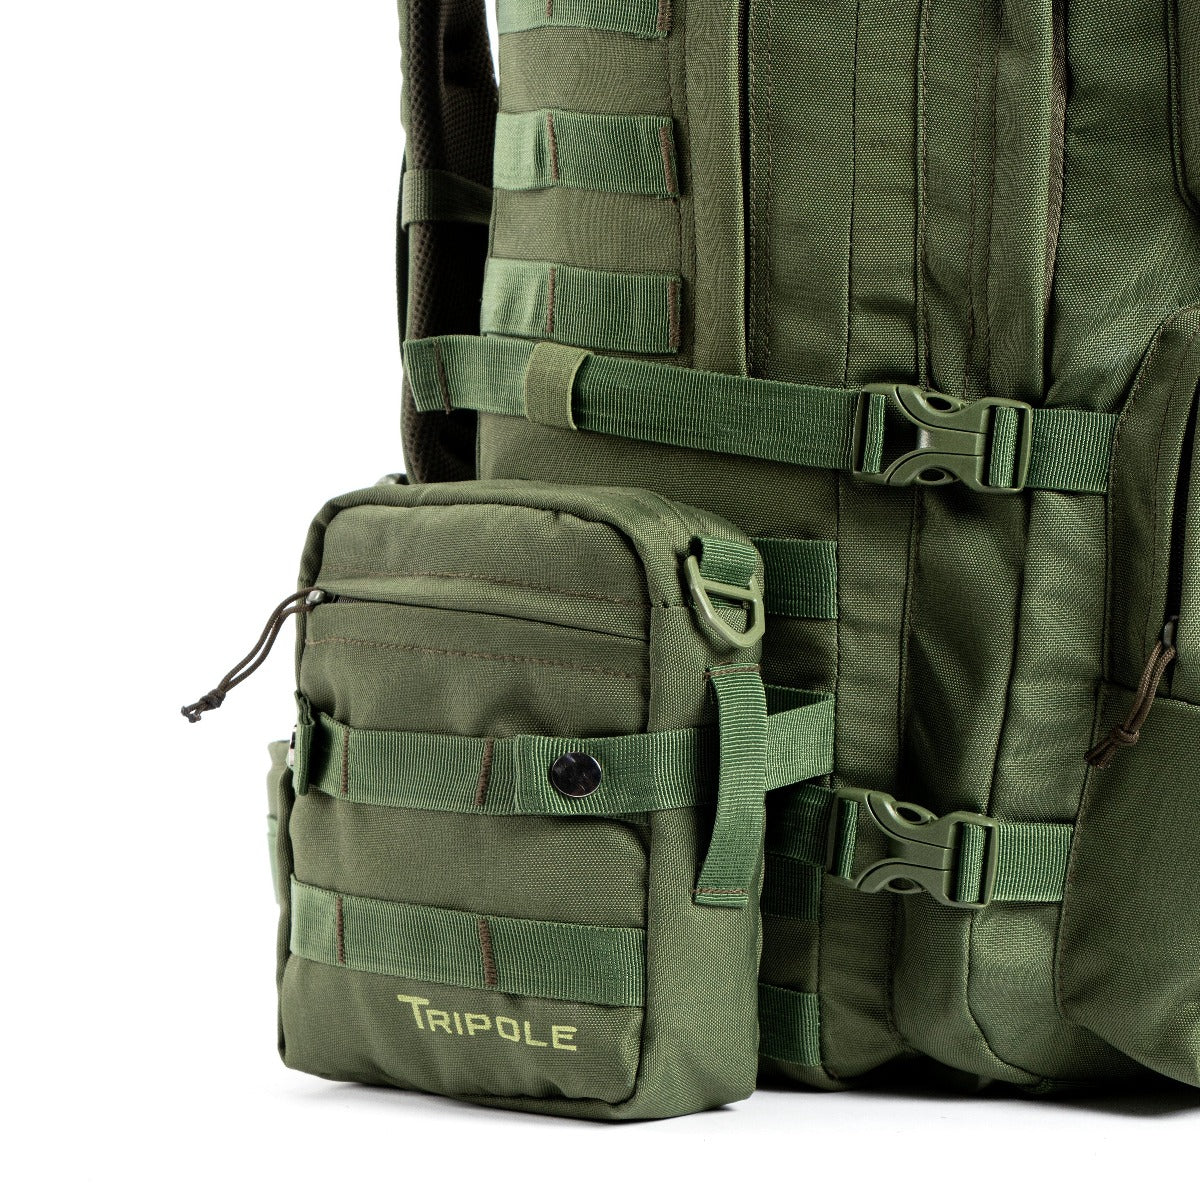 Tripole Alfa Military Tactical Backpack with Sling Bag Attachment -  46 Litres - Army Green 6